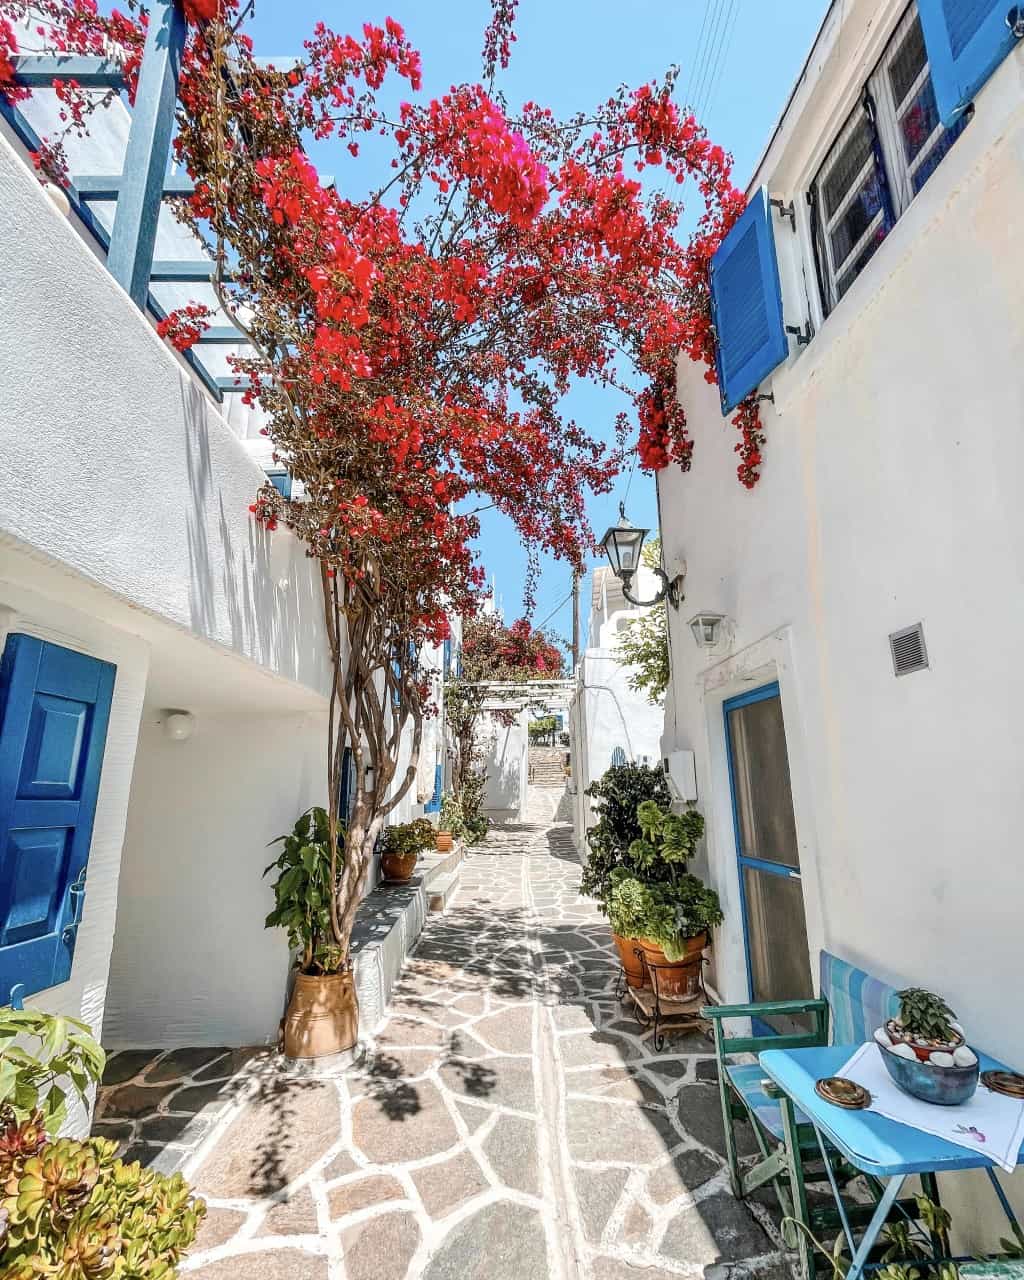 A picturesque cobblestone alley in Marpissa, Paros, flanked by traditional white houses adorned with vibrant bougainvillea flowers.